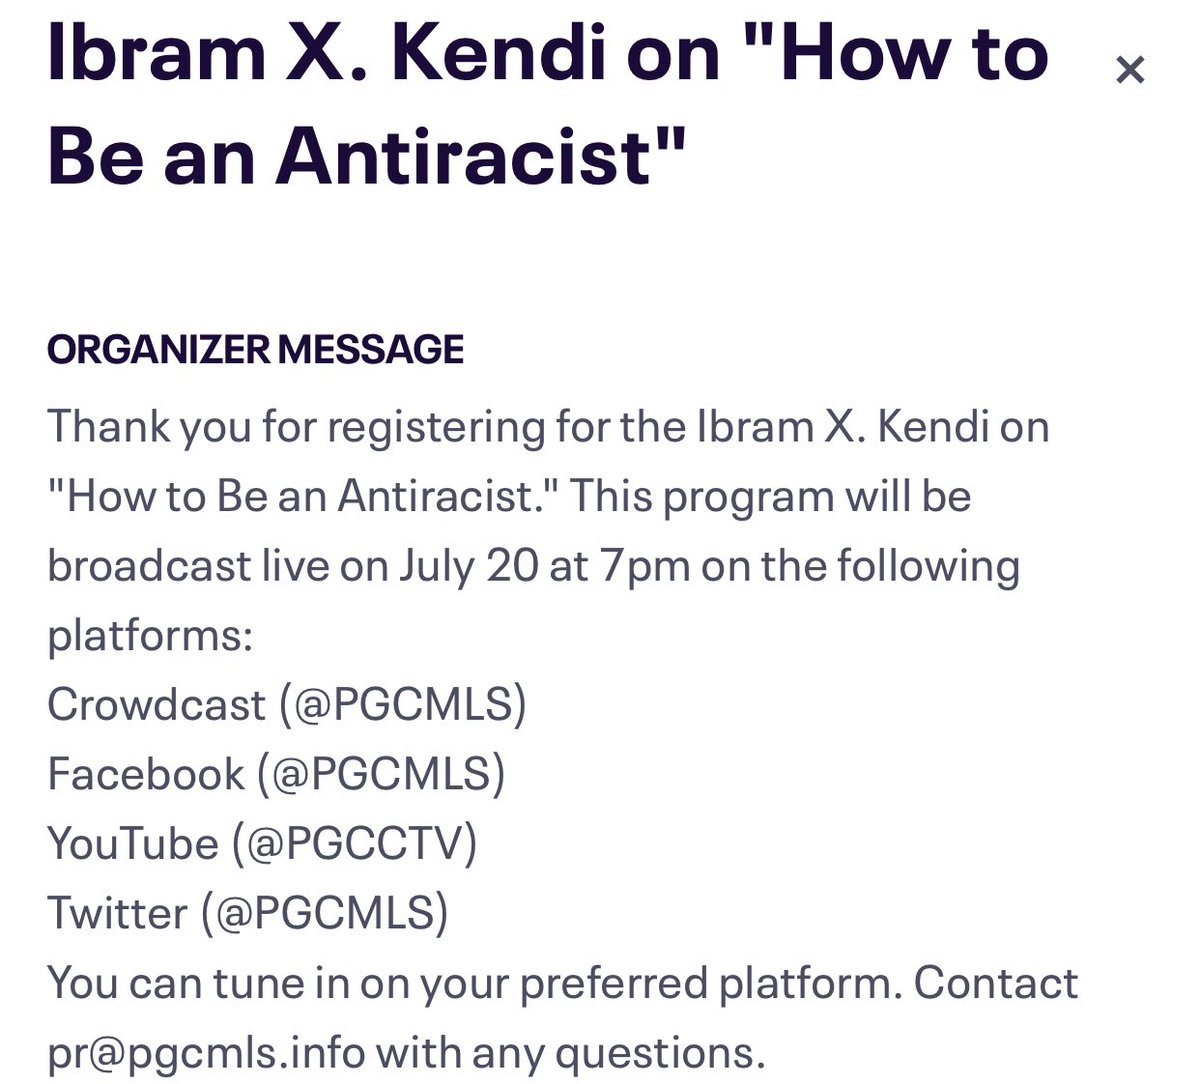 Register for How to Be an Antiracist with @DrIbram on Monday July 20. eventbrite.com/e/ibram-x-kend… #antiracism #socialjusticeeducation